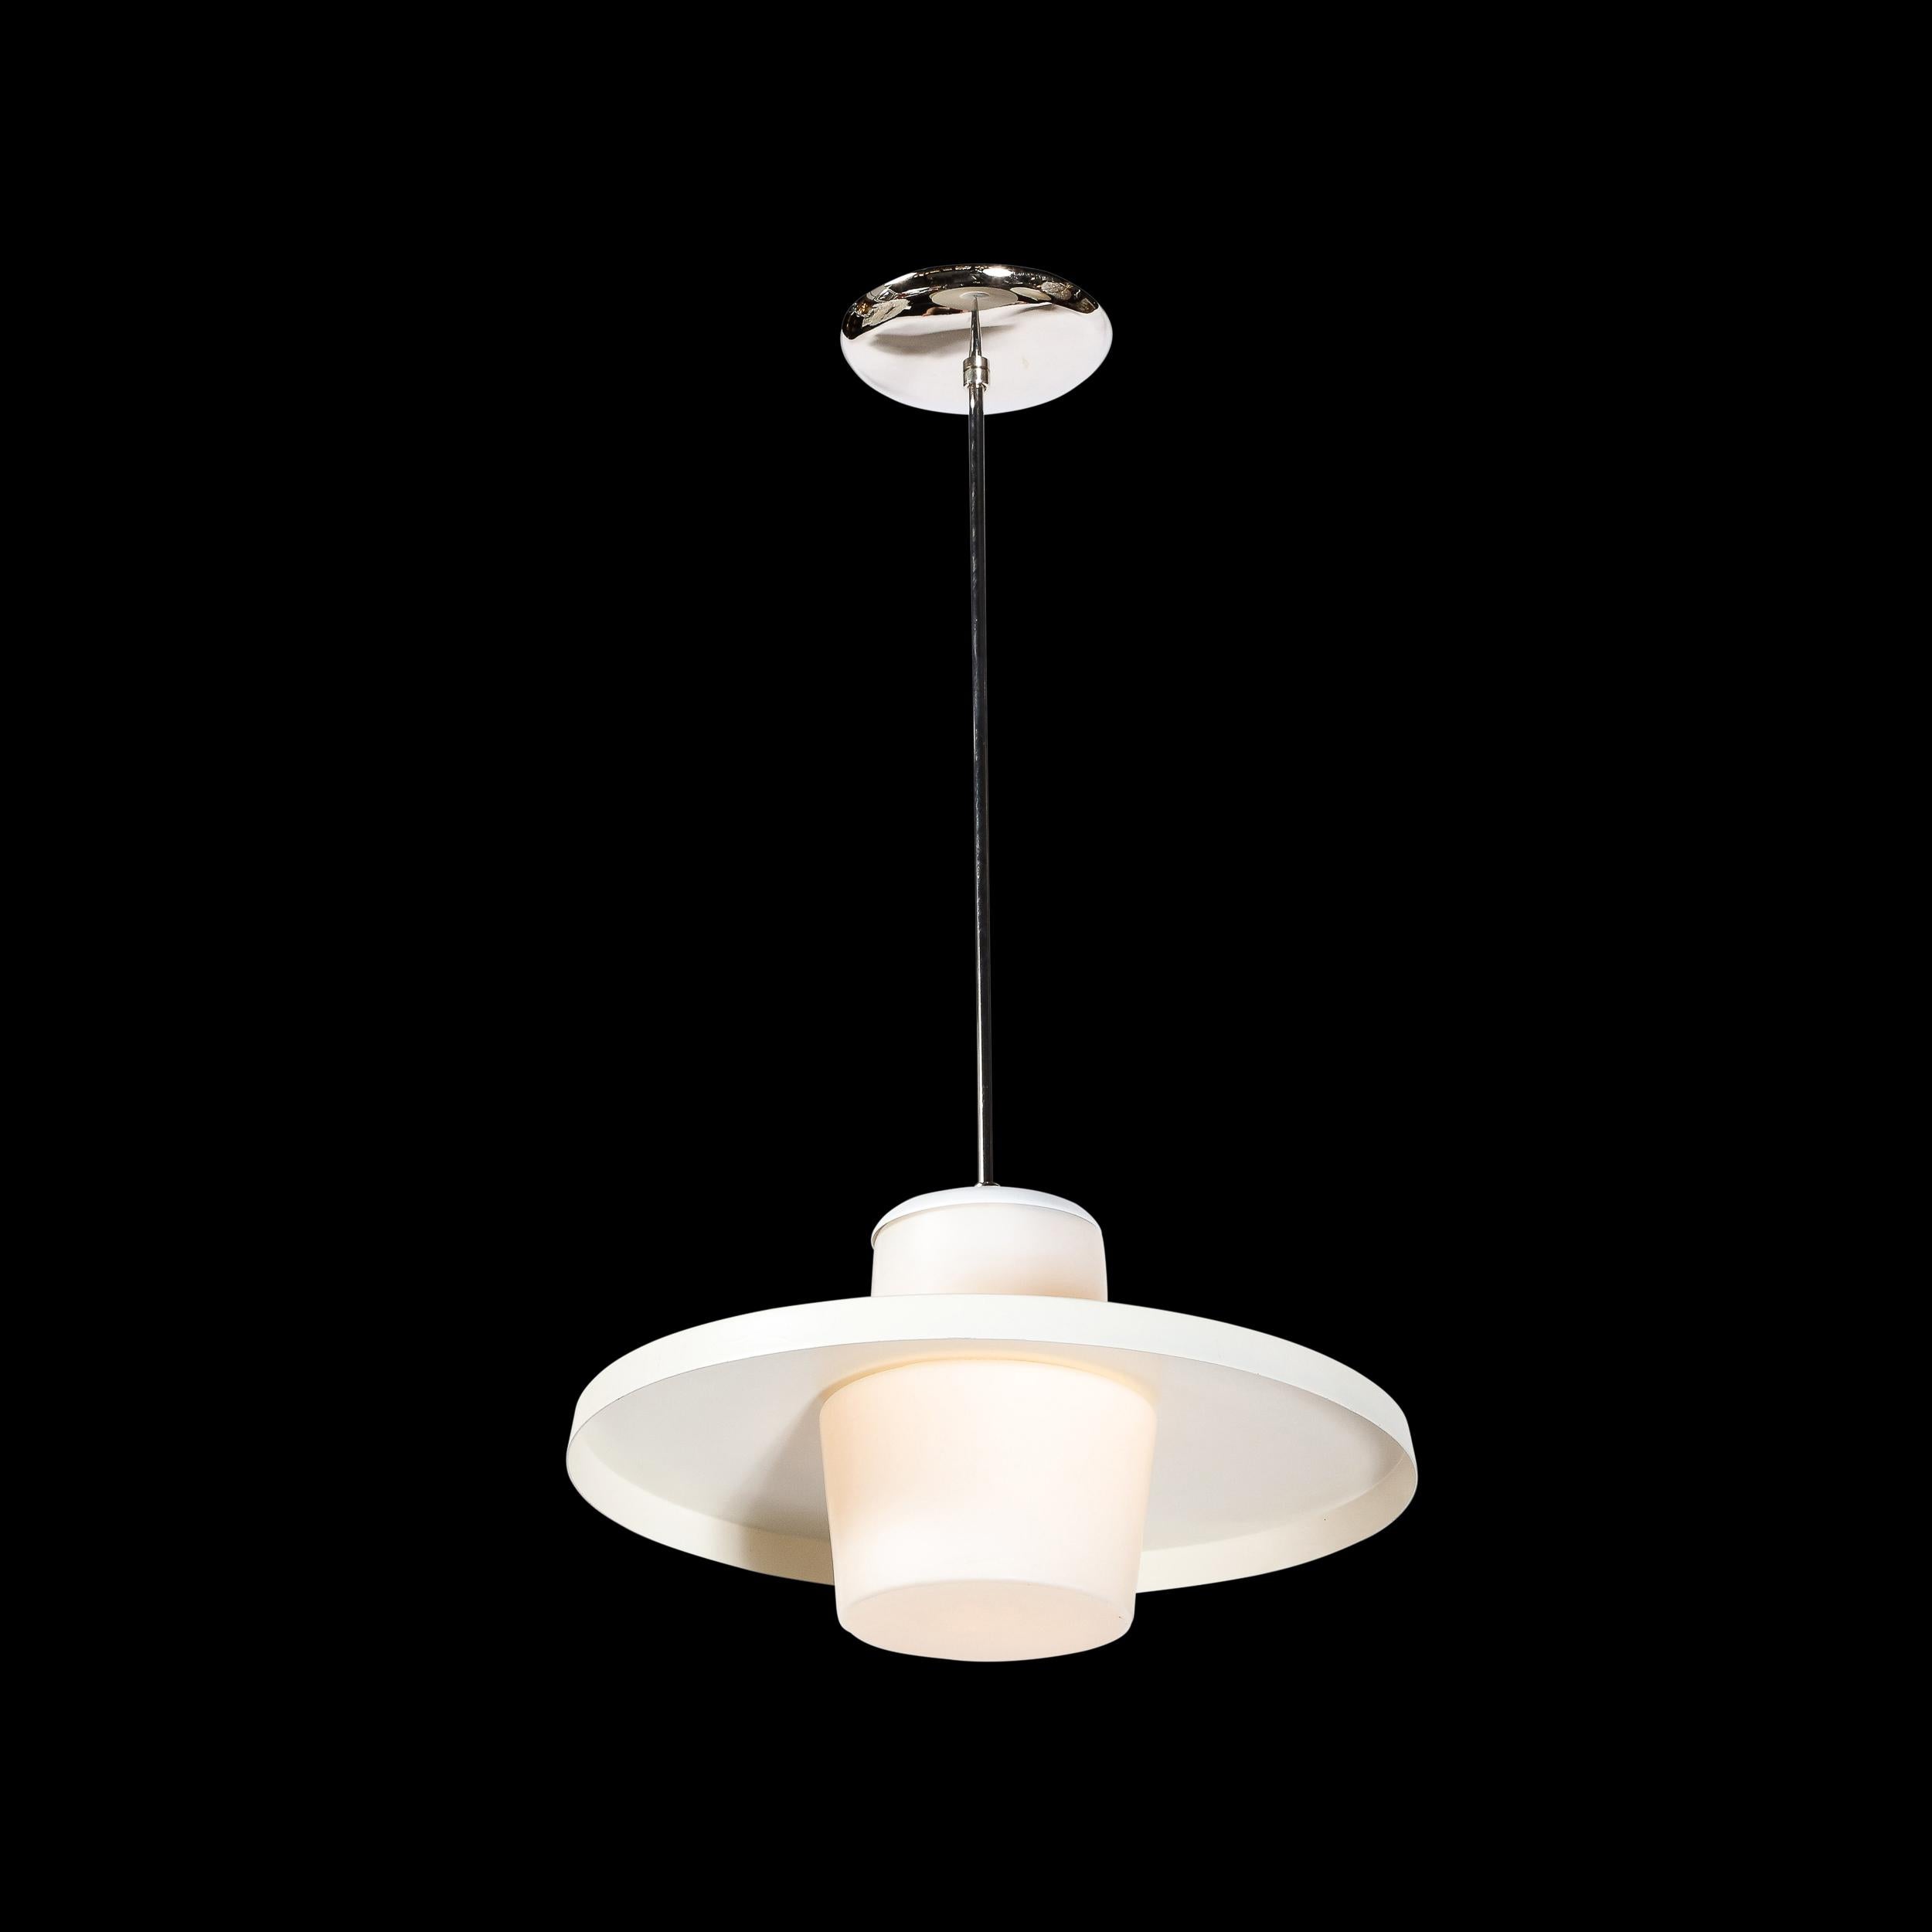 This refined and sophisticated Mid-Century Modern pendant was realized in Czechoslovakia circa 1950. Resembling a stylized flying saucer, the pendant features a white enamel tented shade with a raised lip that bisects the cylindrical frosted glass